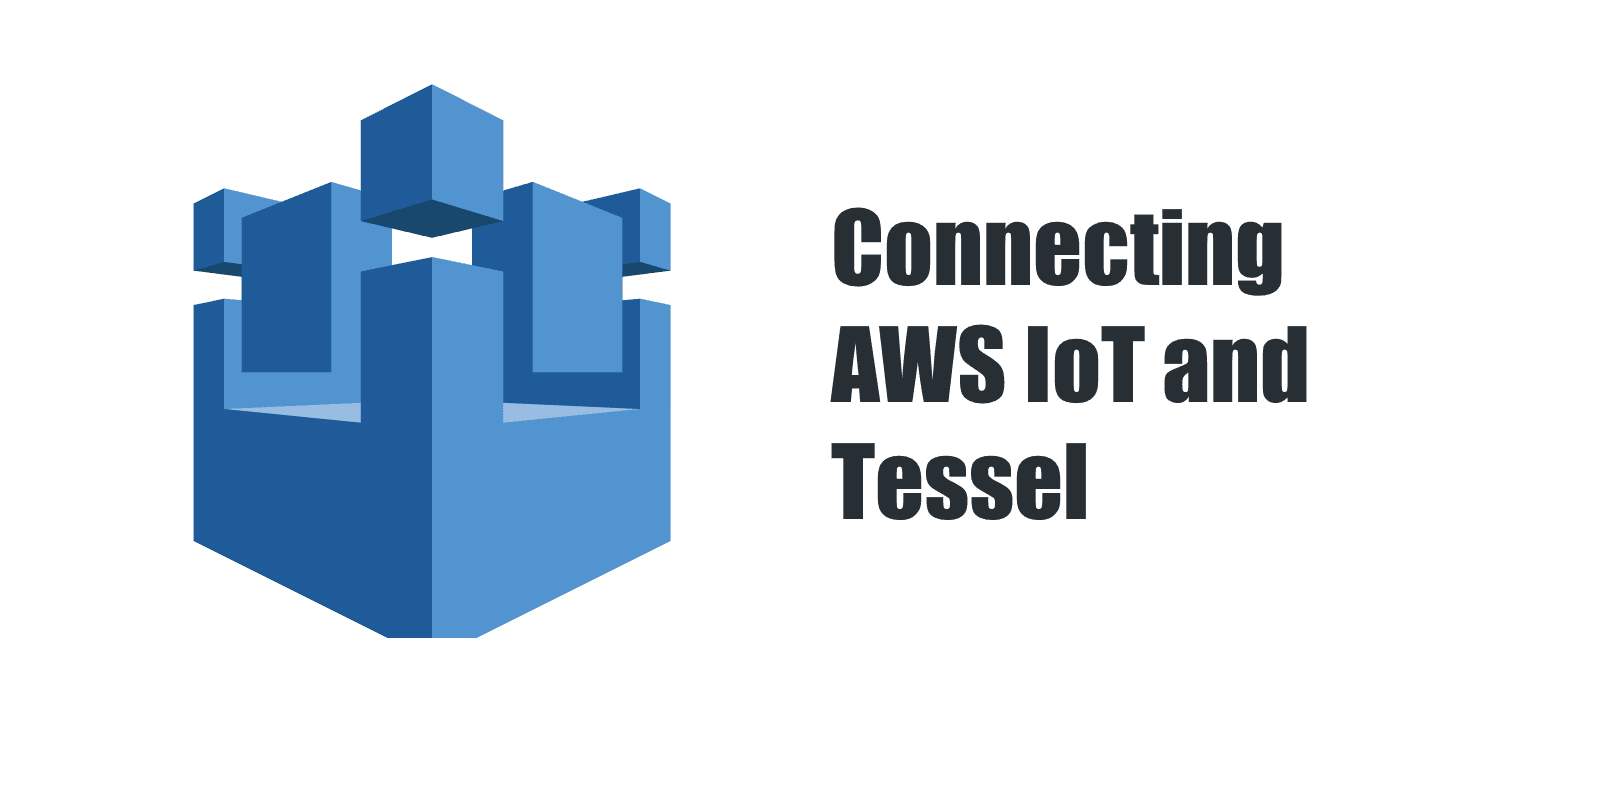 Connecting AWS IoT and Tessel